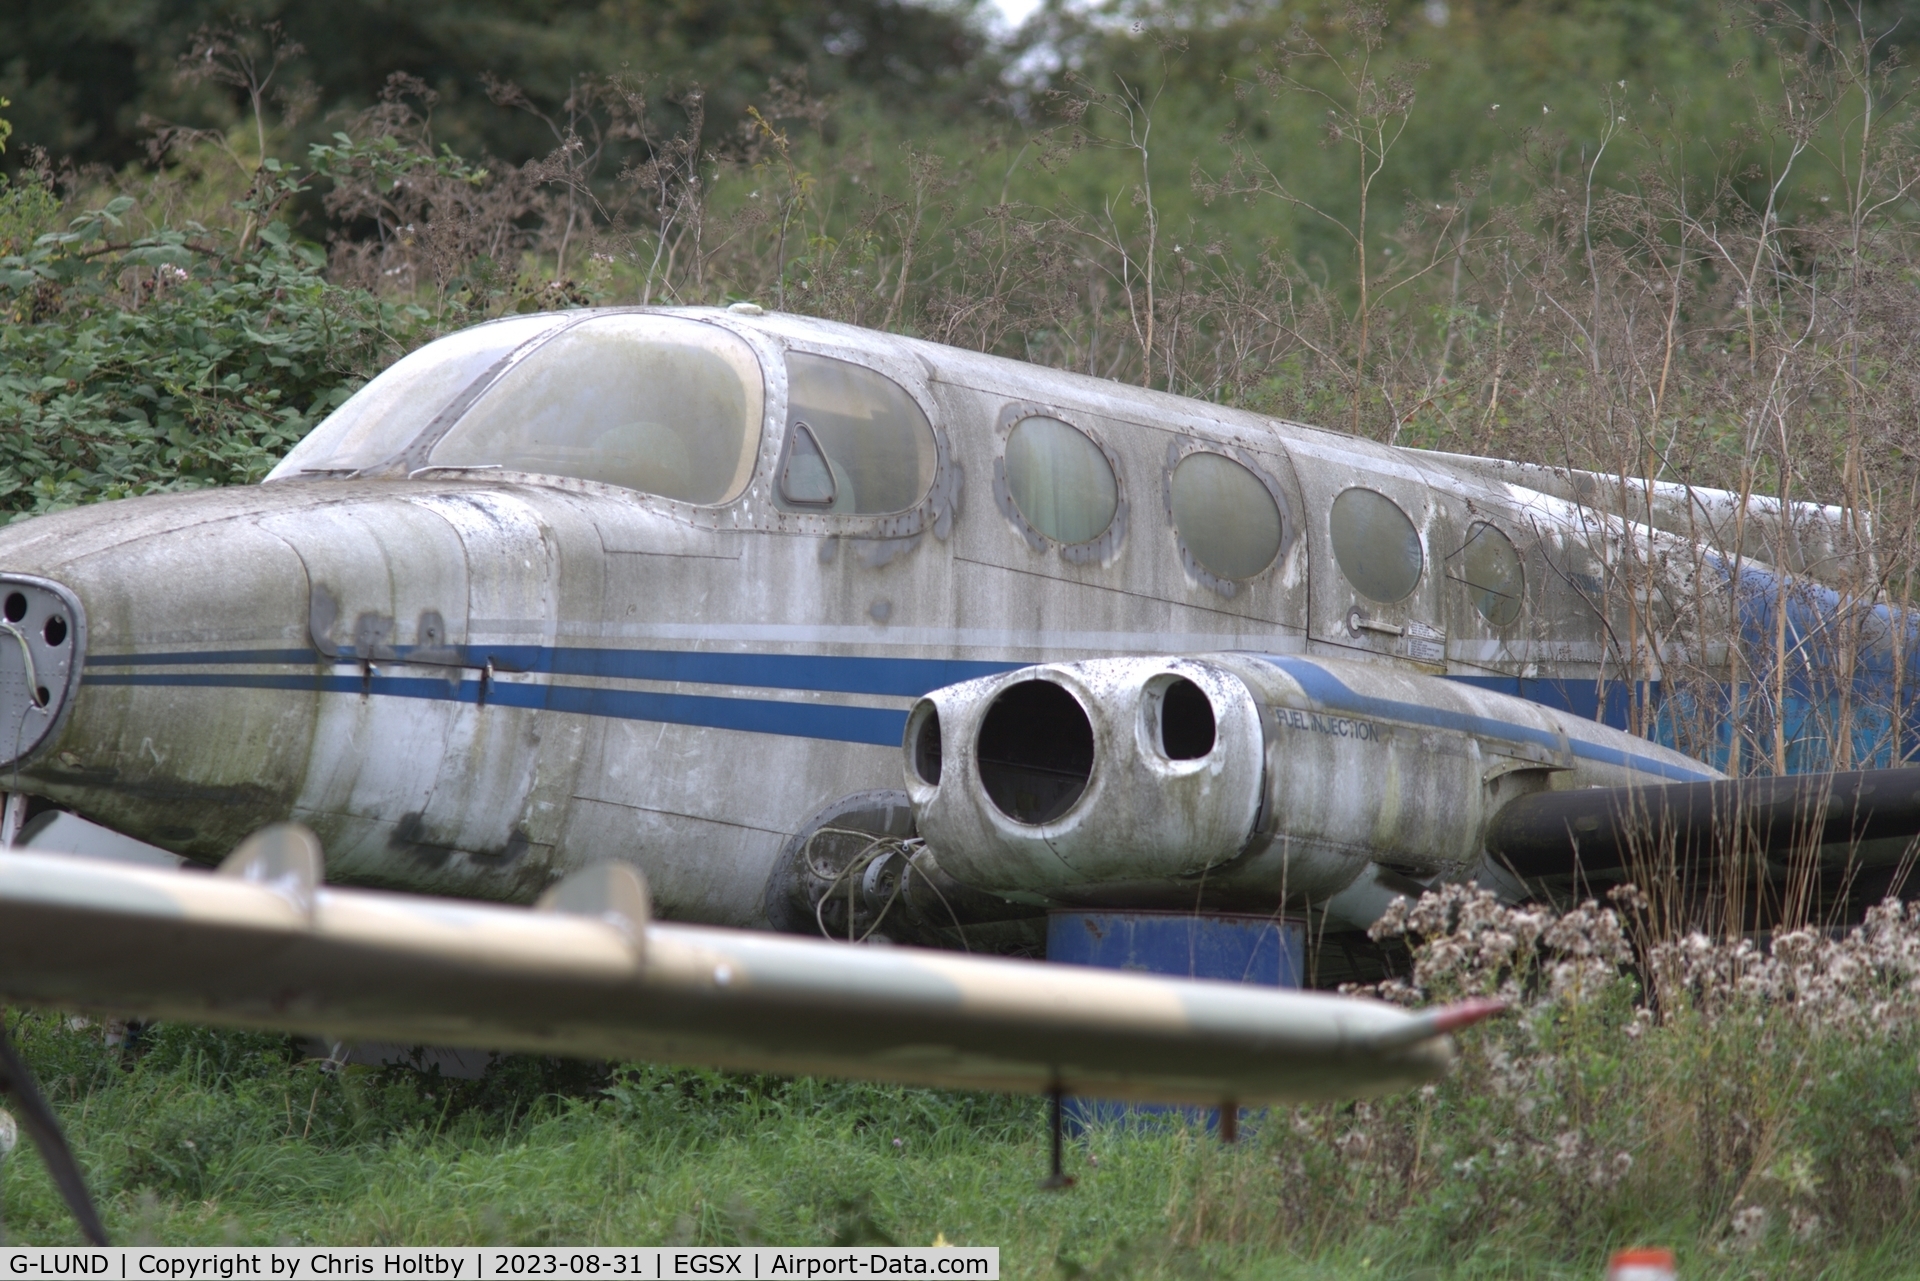 G-LUND, 1973 Cessna 340 C/N 340-0305, Not much left & sinking into the foliage at North Weald, Essex